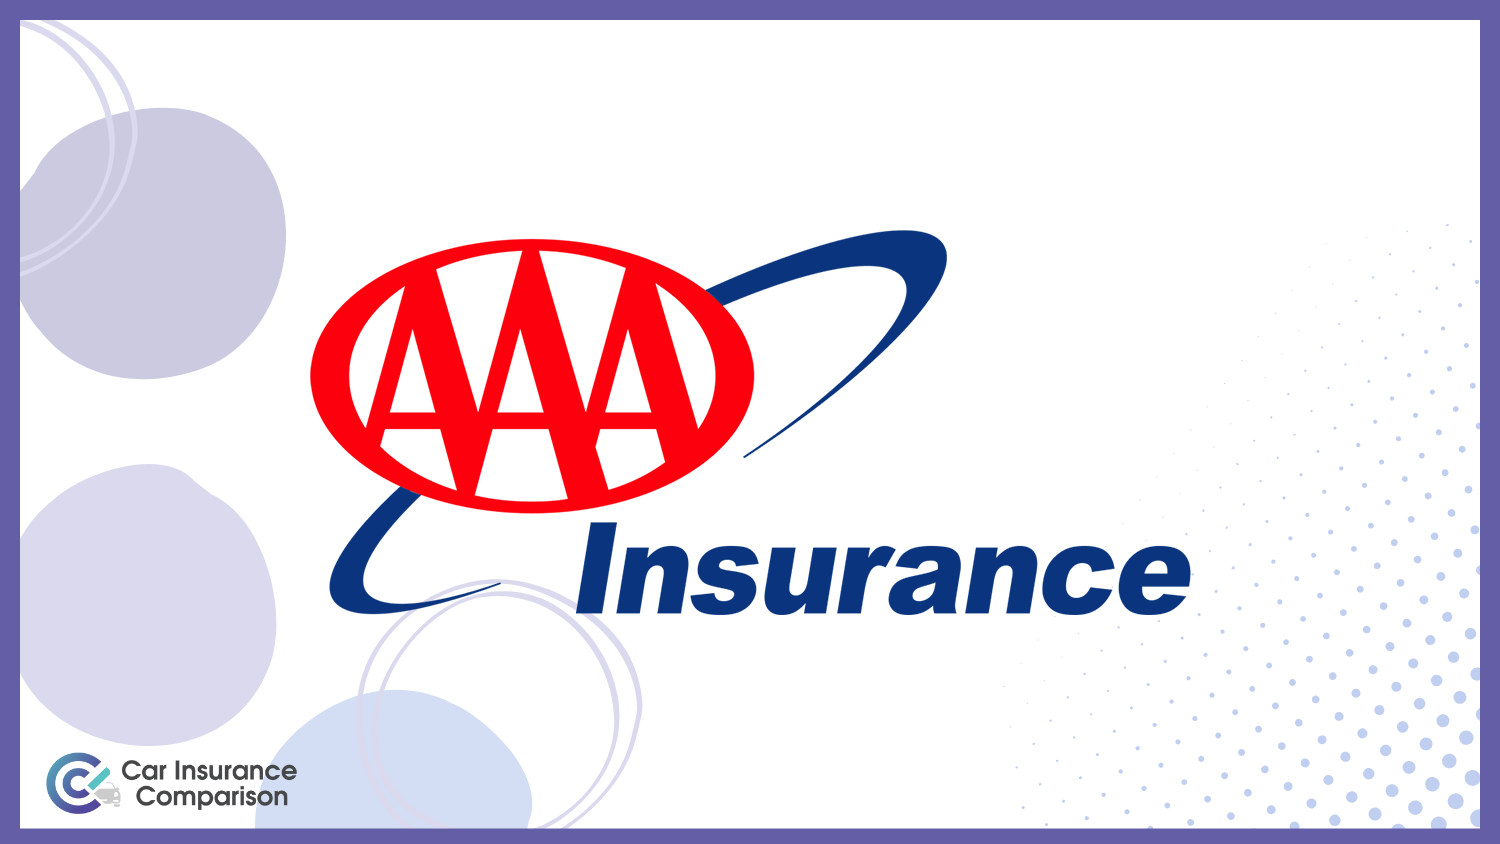 AAA: Best Car Insurance for Drivers Under 25